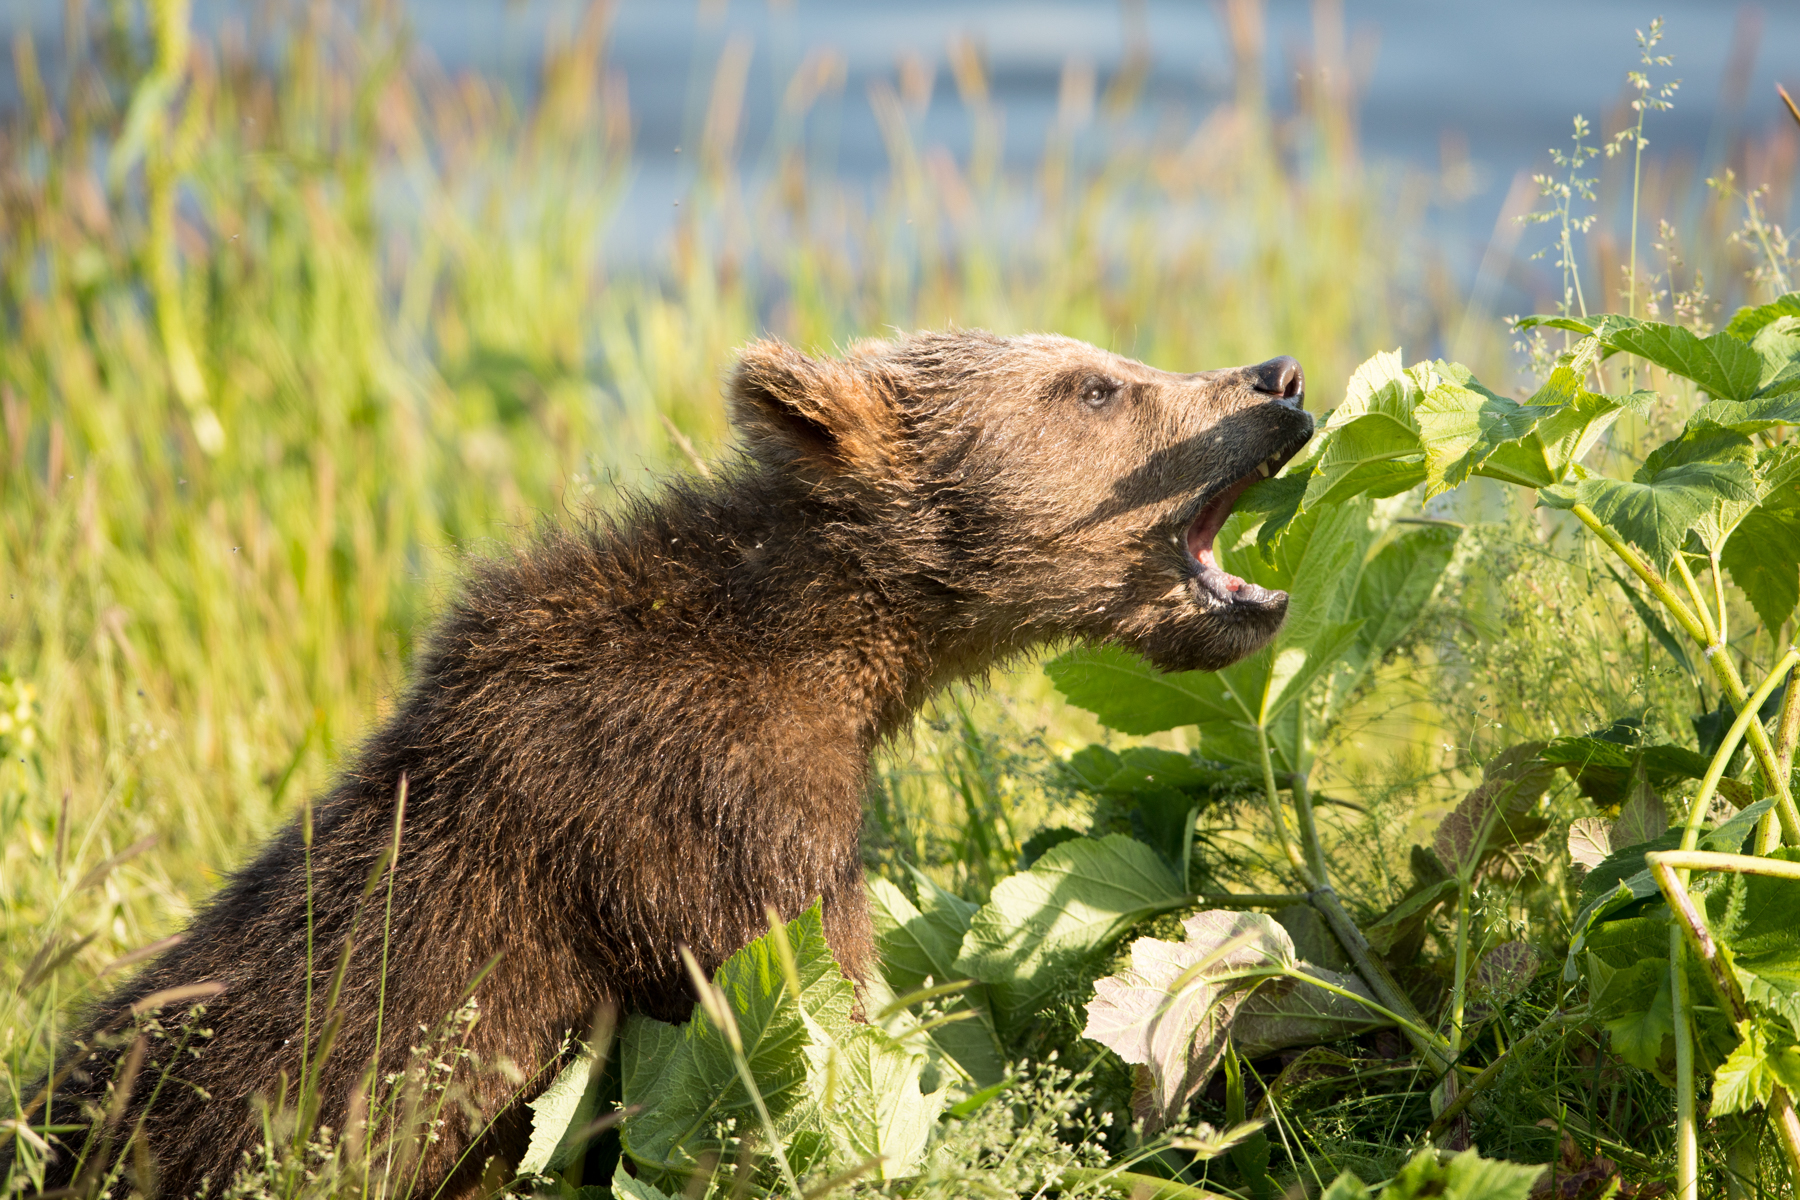 A small brown bear cub leans in to eat a wild cow parsnip leaf.